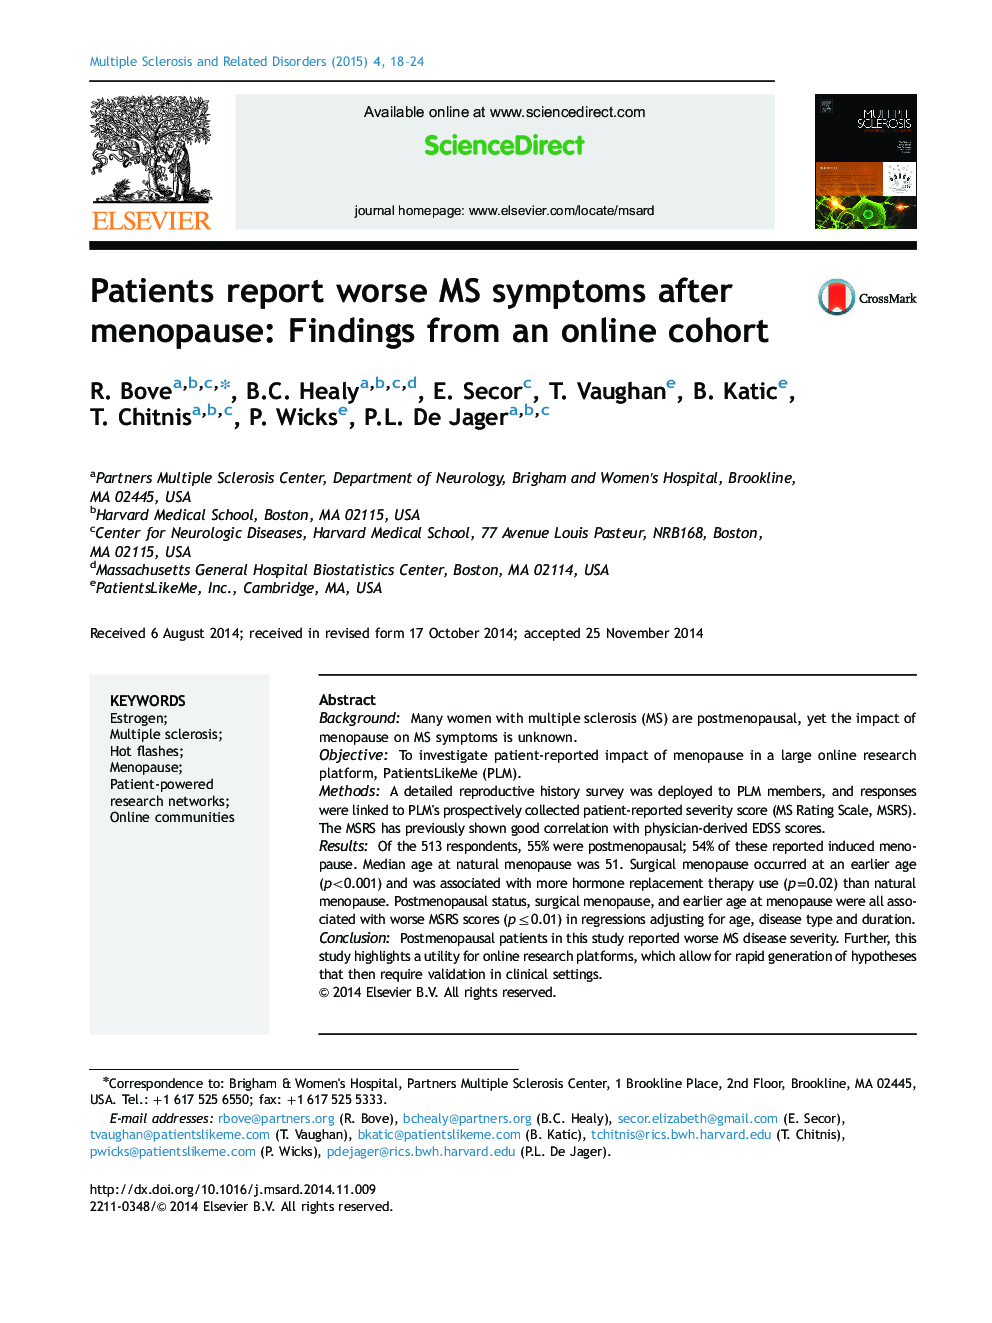 Patients report worse MS symptoms after menopause: Findings from an online cohort